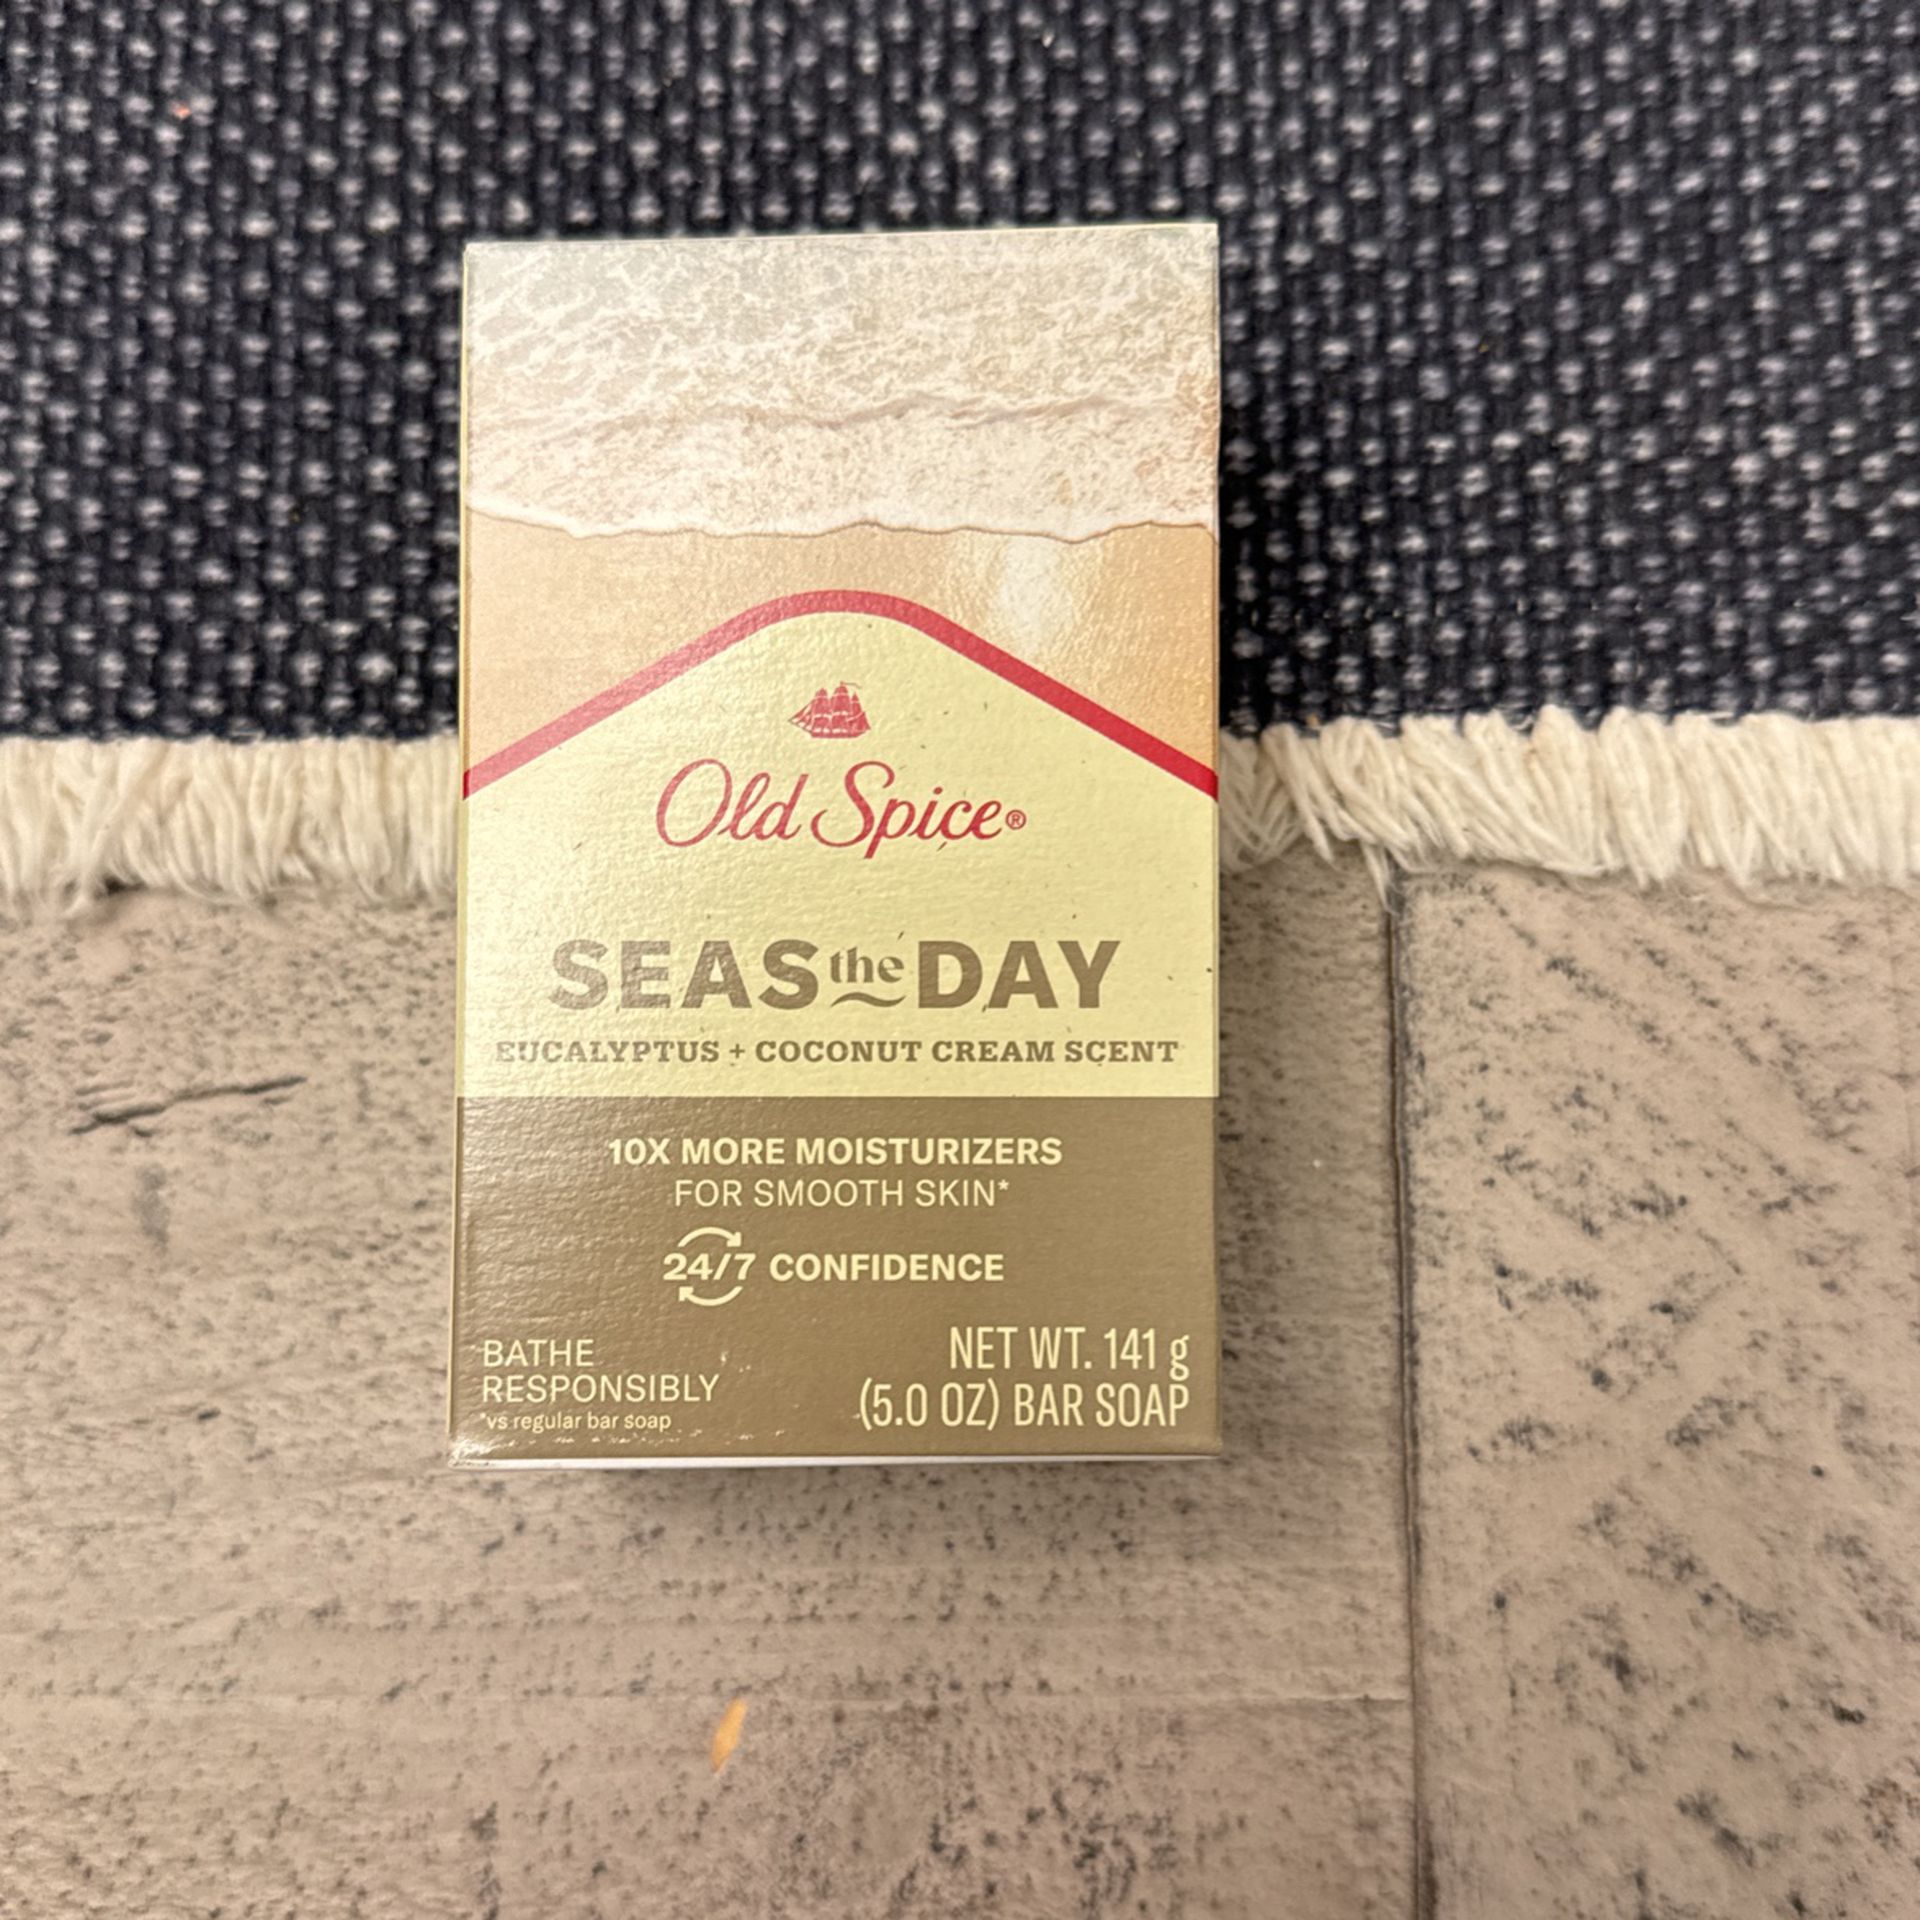 Old Spice Premium Bar Soap, Seas The Day Eucalyptus and Coconut Cream Scent, for All Skin Types, 5oz